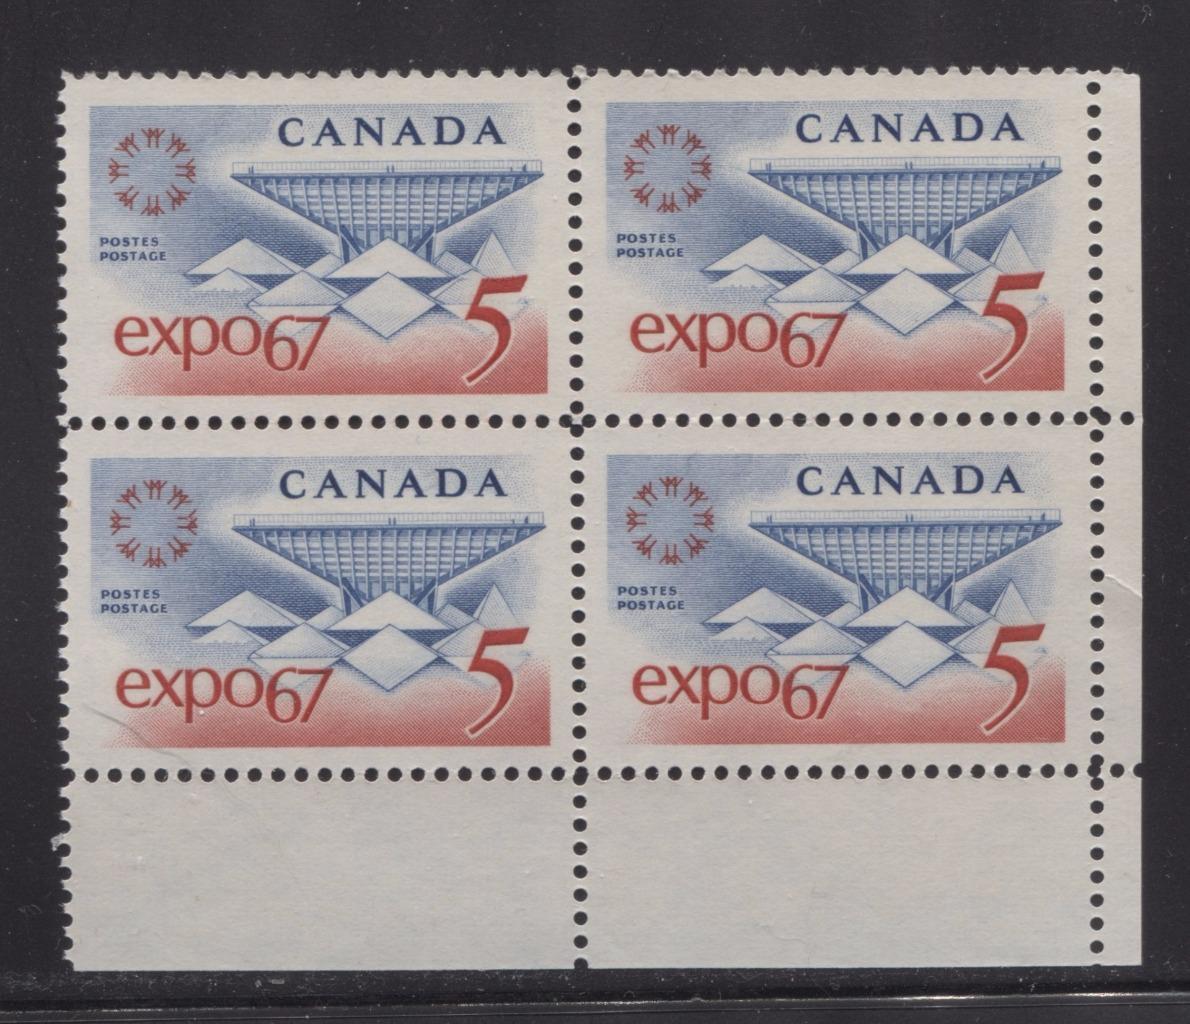 Canada #469 (SG#611) 5c Blue and Red Expo 67 DF-fl GW, LF, VF Ribbed Paper LR Block VF-80 NH Brixton Chrome 